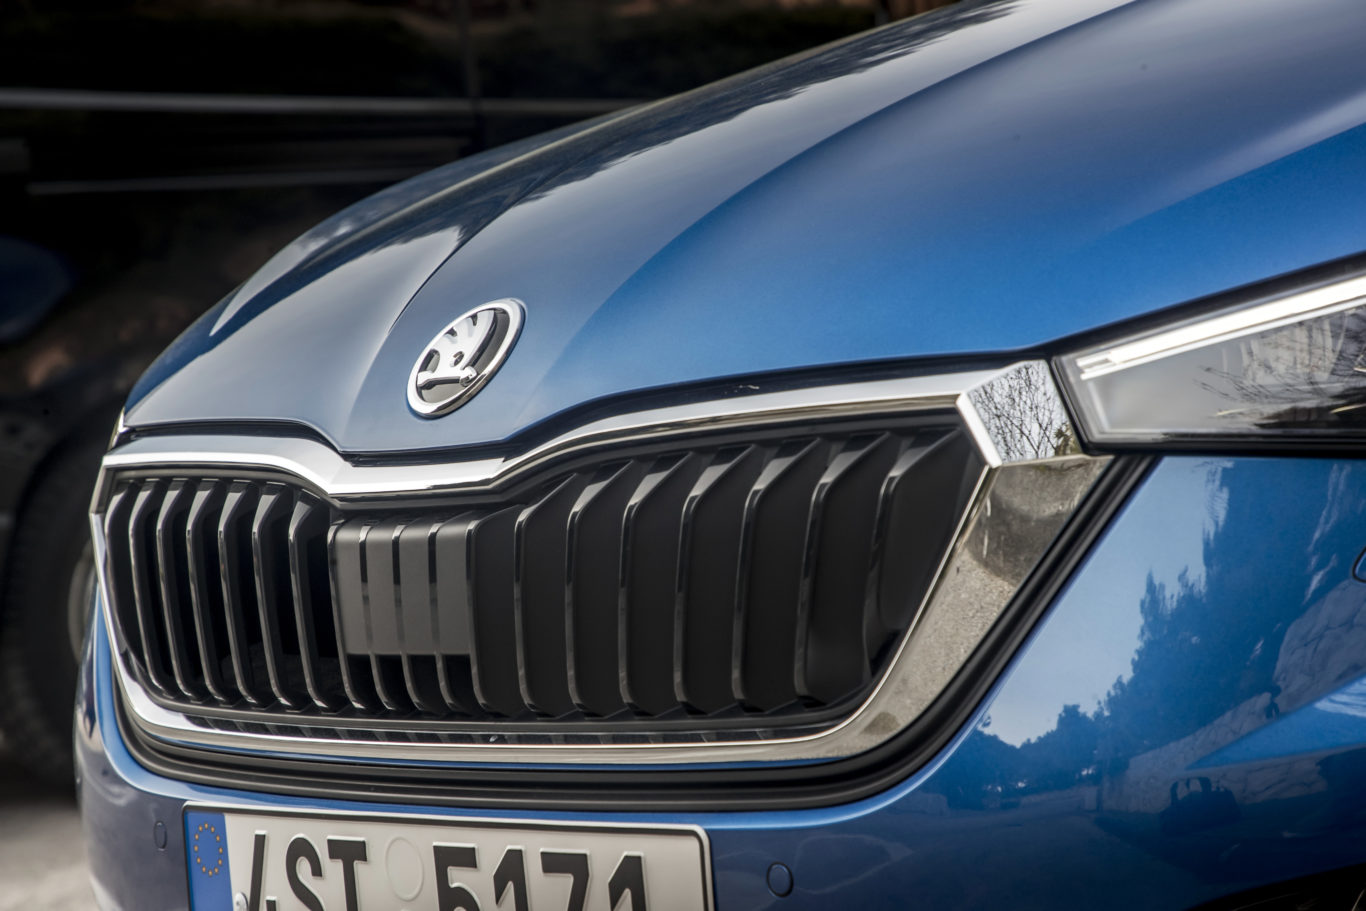 A central radar system is fitted to the middle of the grille